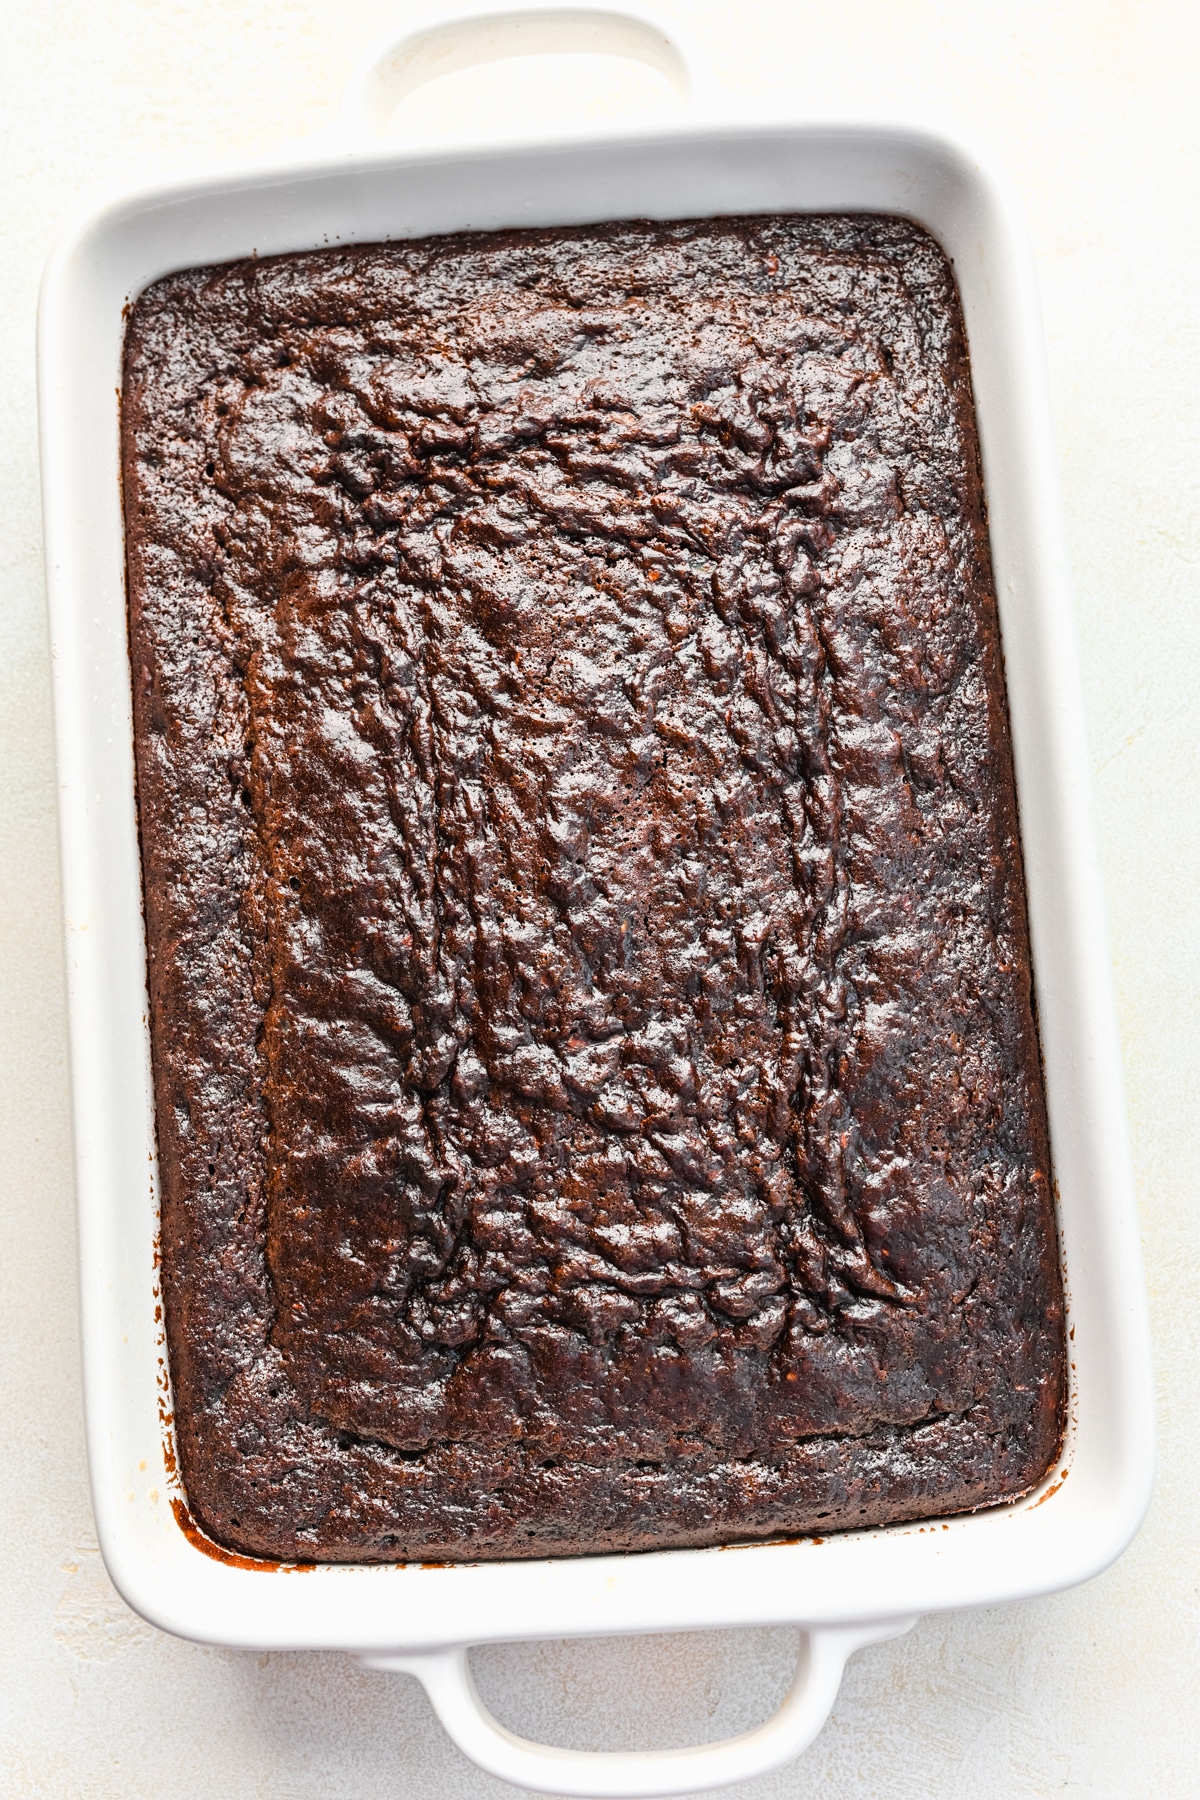 Baked chocolate zucchini cake in a white baking pan.